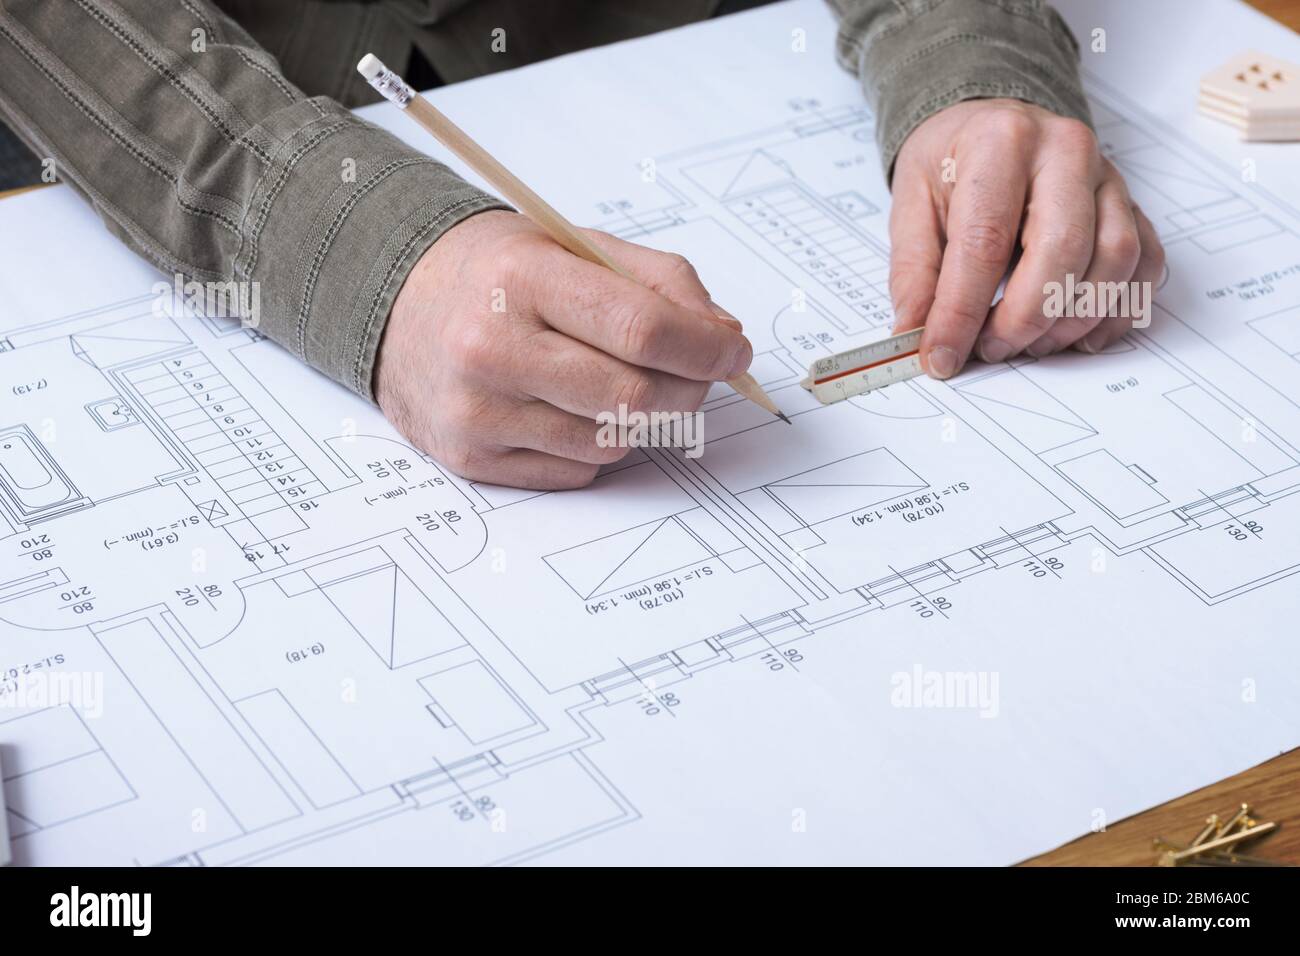 Professional architect and construction engineer working at office desk hands close-up, he is drawing on a building project with a pencil and a ruler Stock Photo